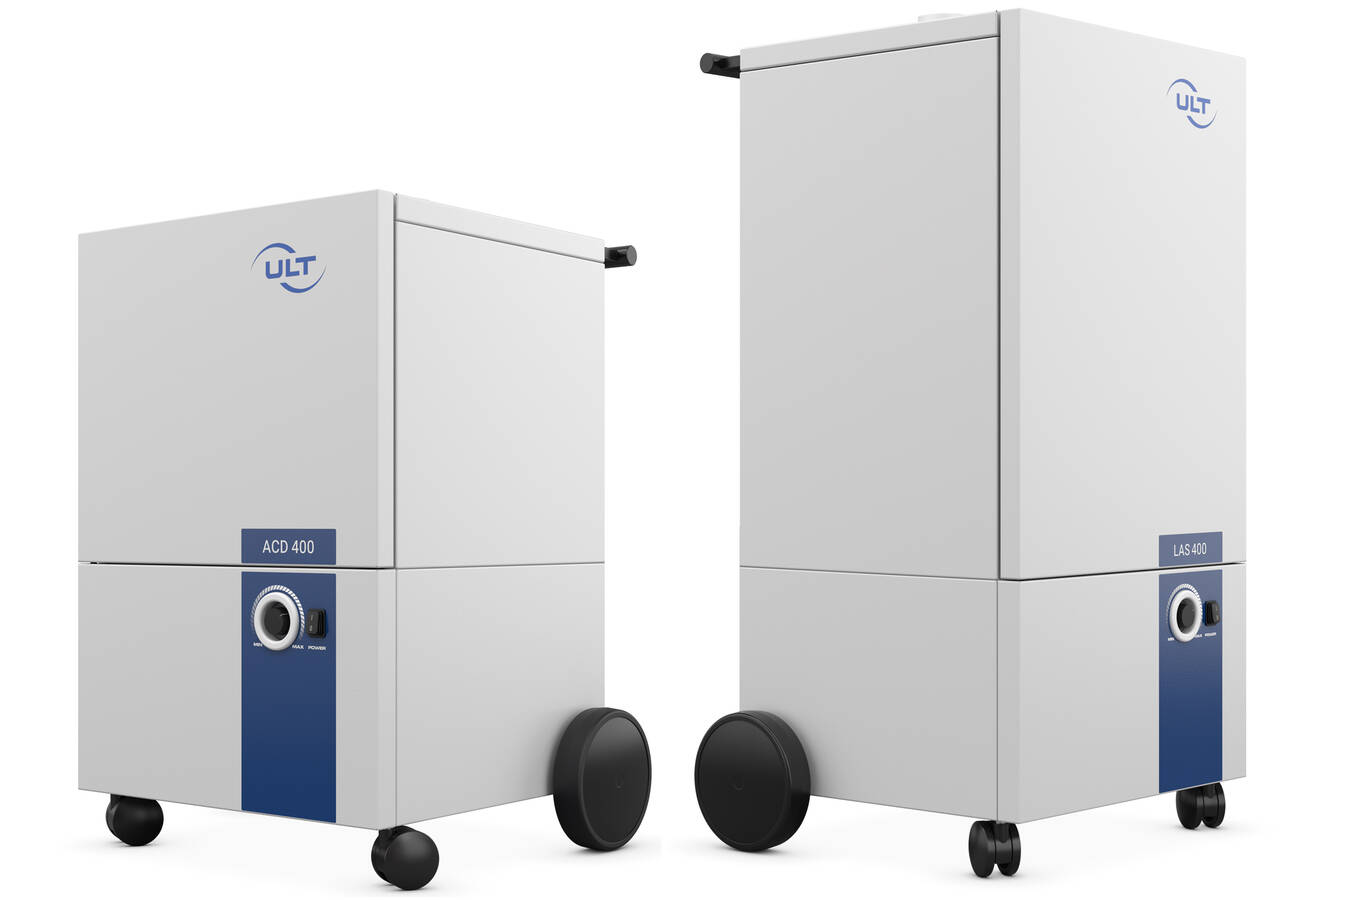 New product family of modular extraction and filtration systems The new ULT 400.1 product series ensures energy-efficient and quiet operation with high flexibility and modularity - removing a wide range of emissions